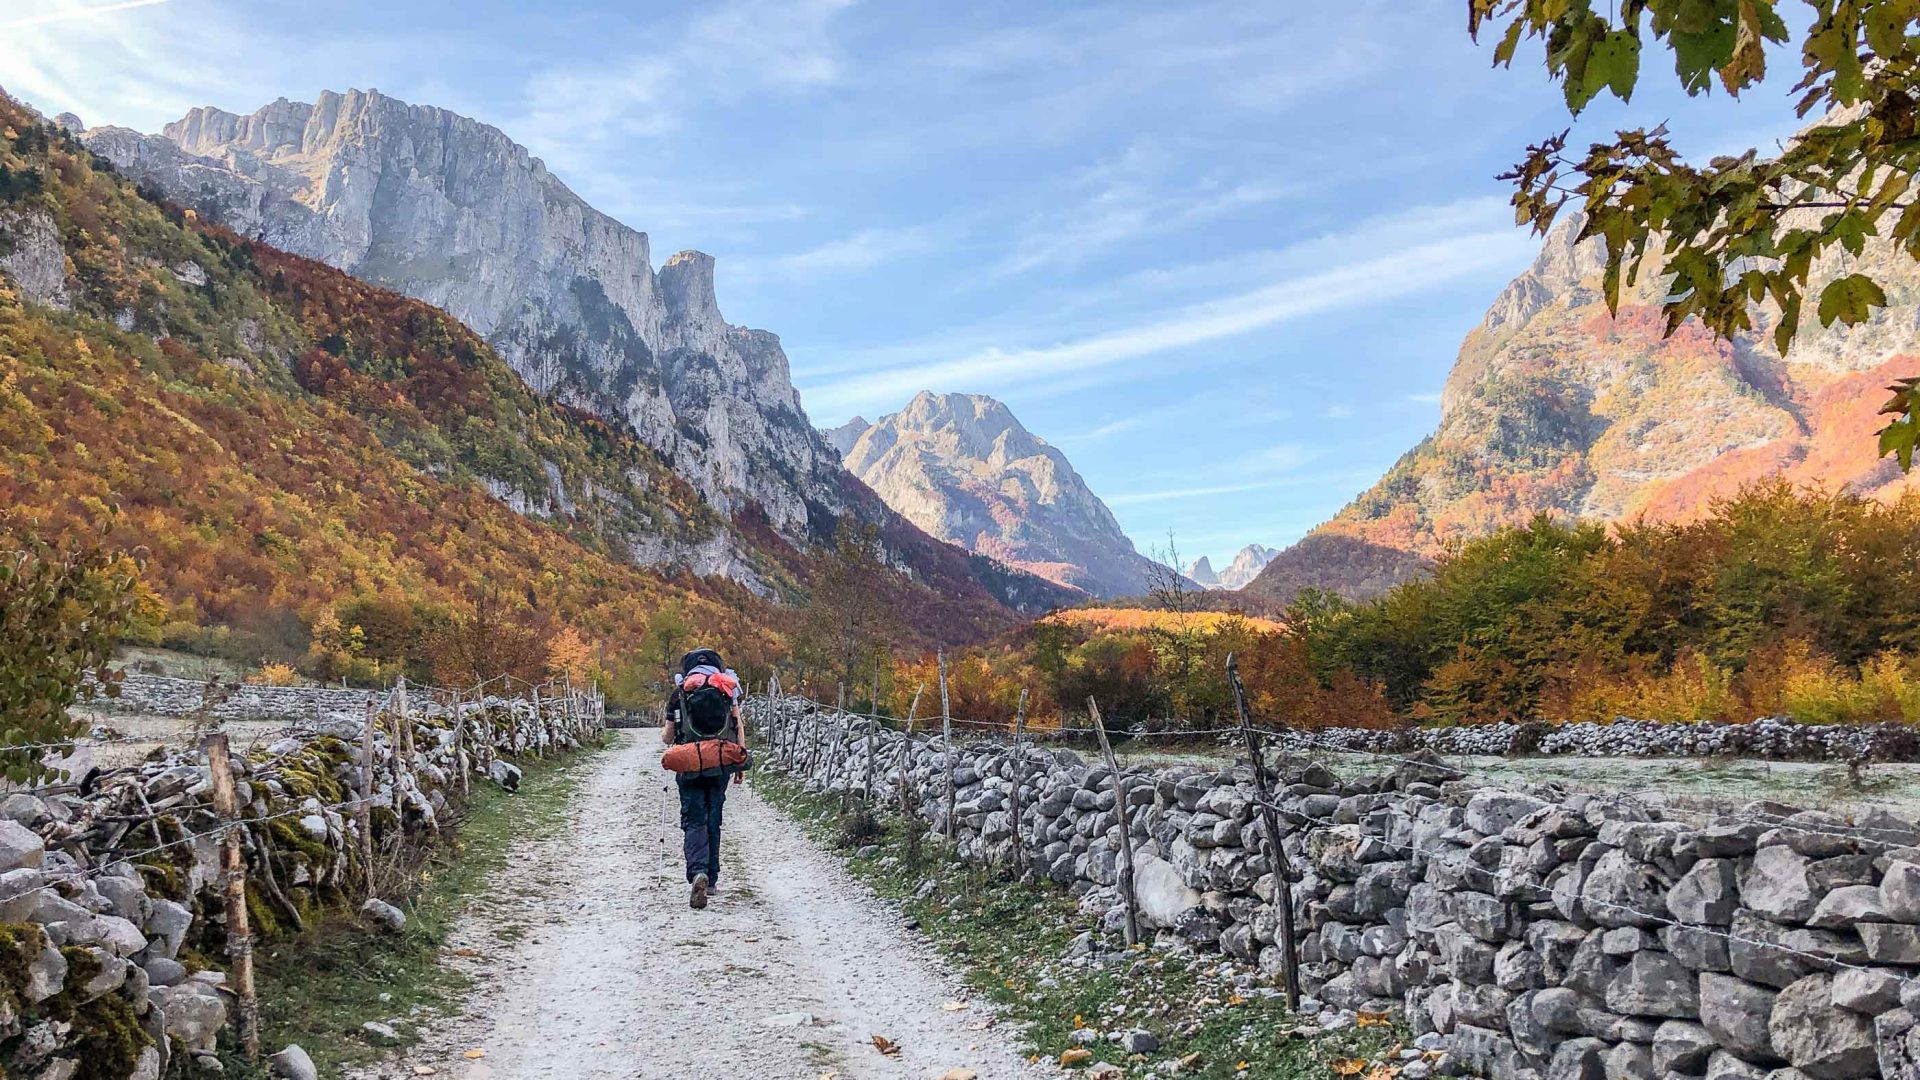 What’s it like to hike through the Balkan borderlands?